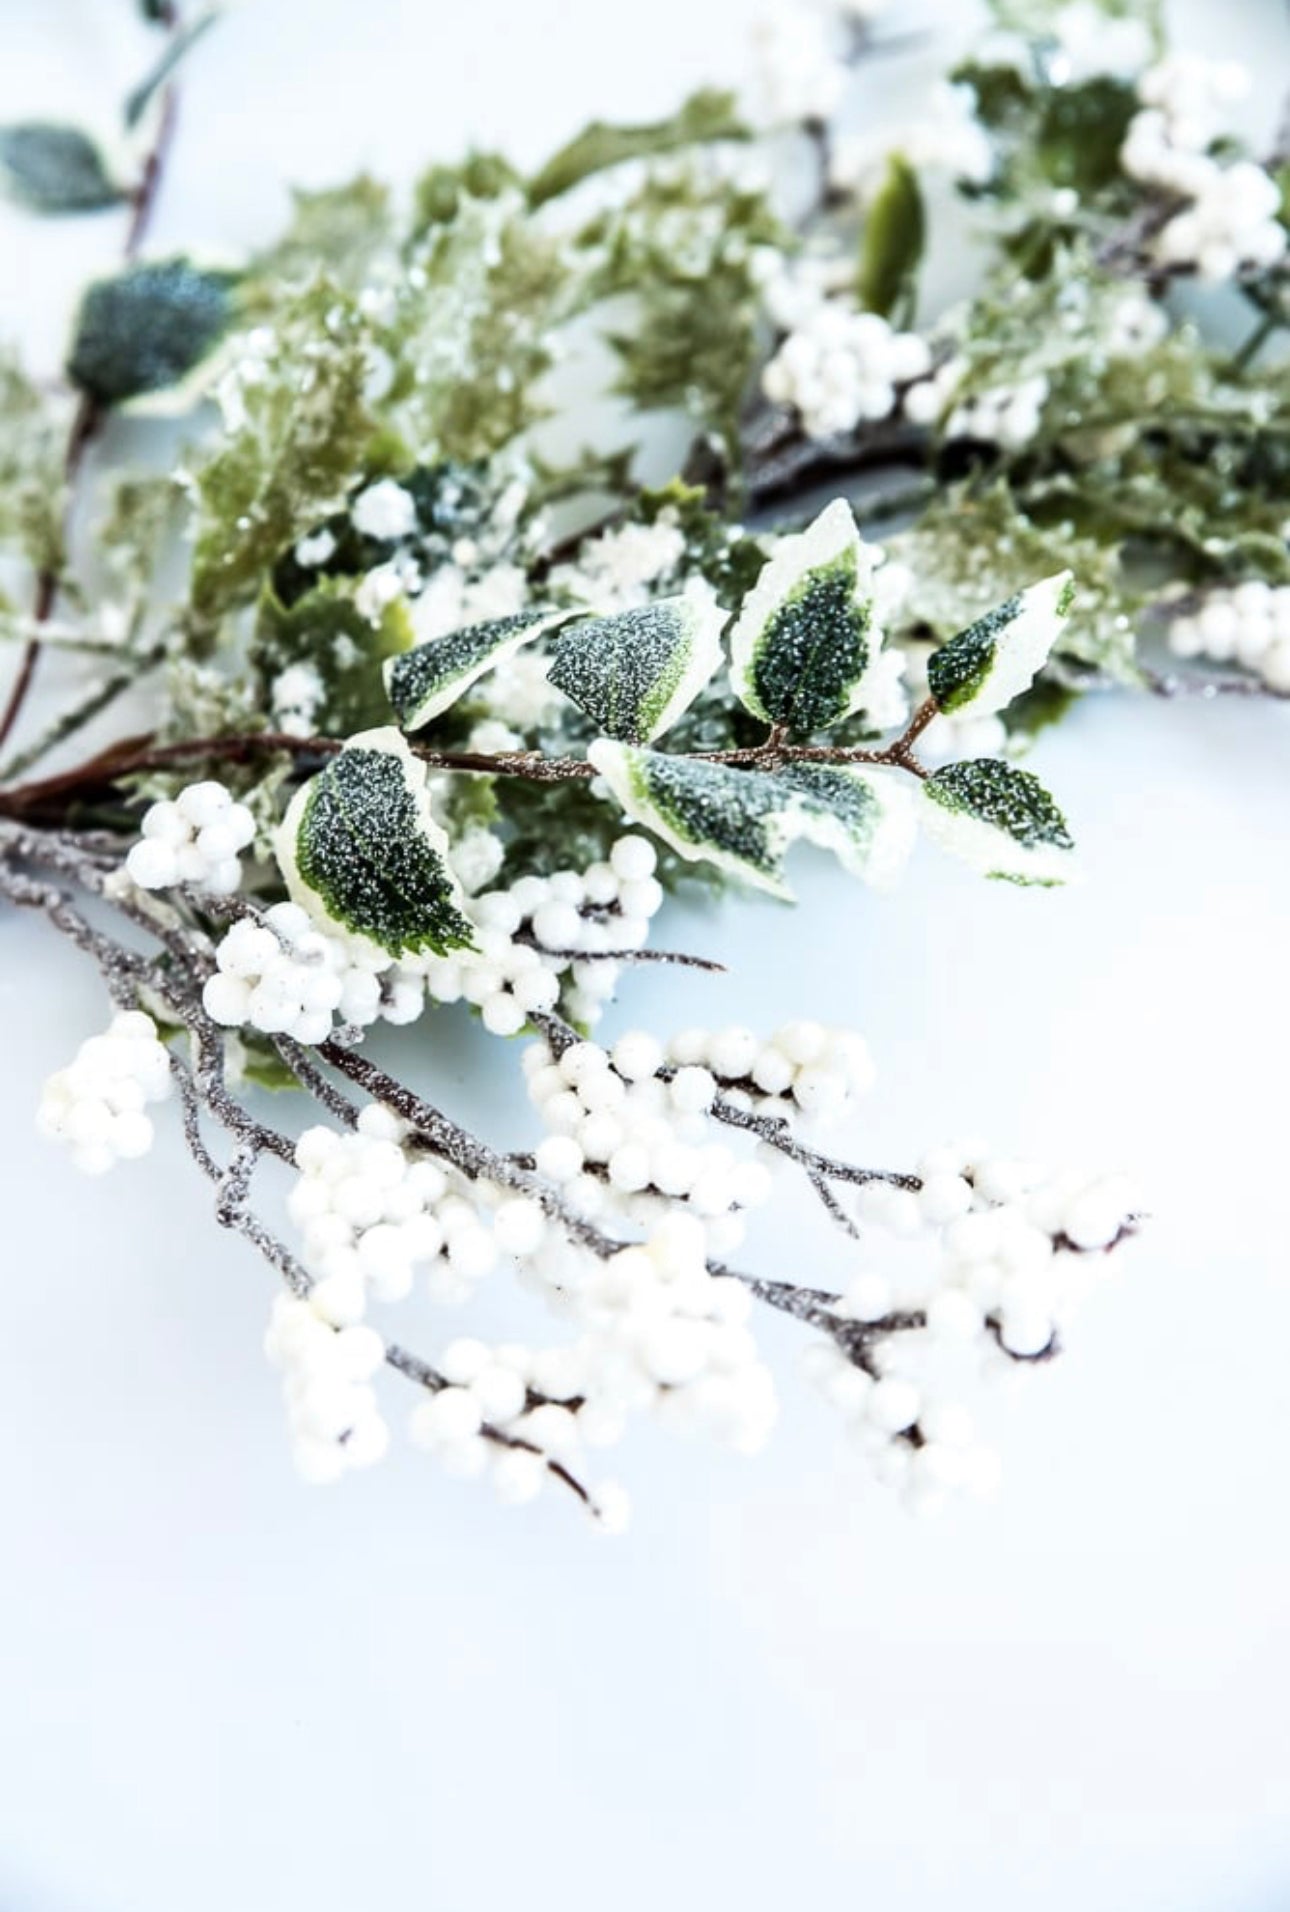 Frosted Mini Leaves, Holly, and White Berries Pick - Greenery Market